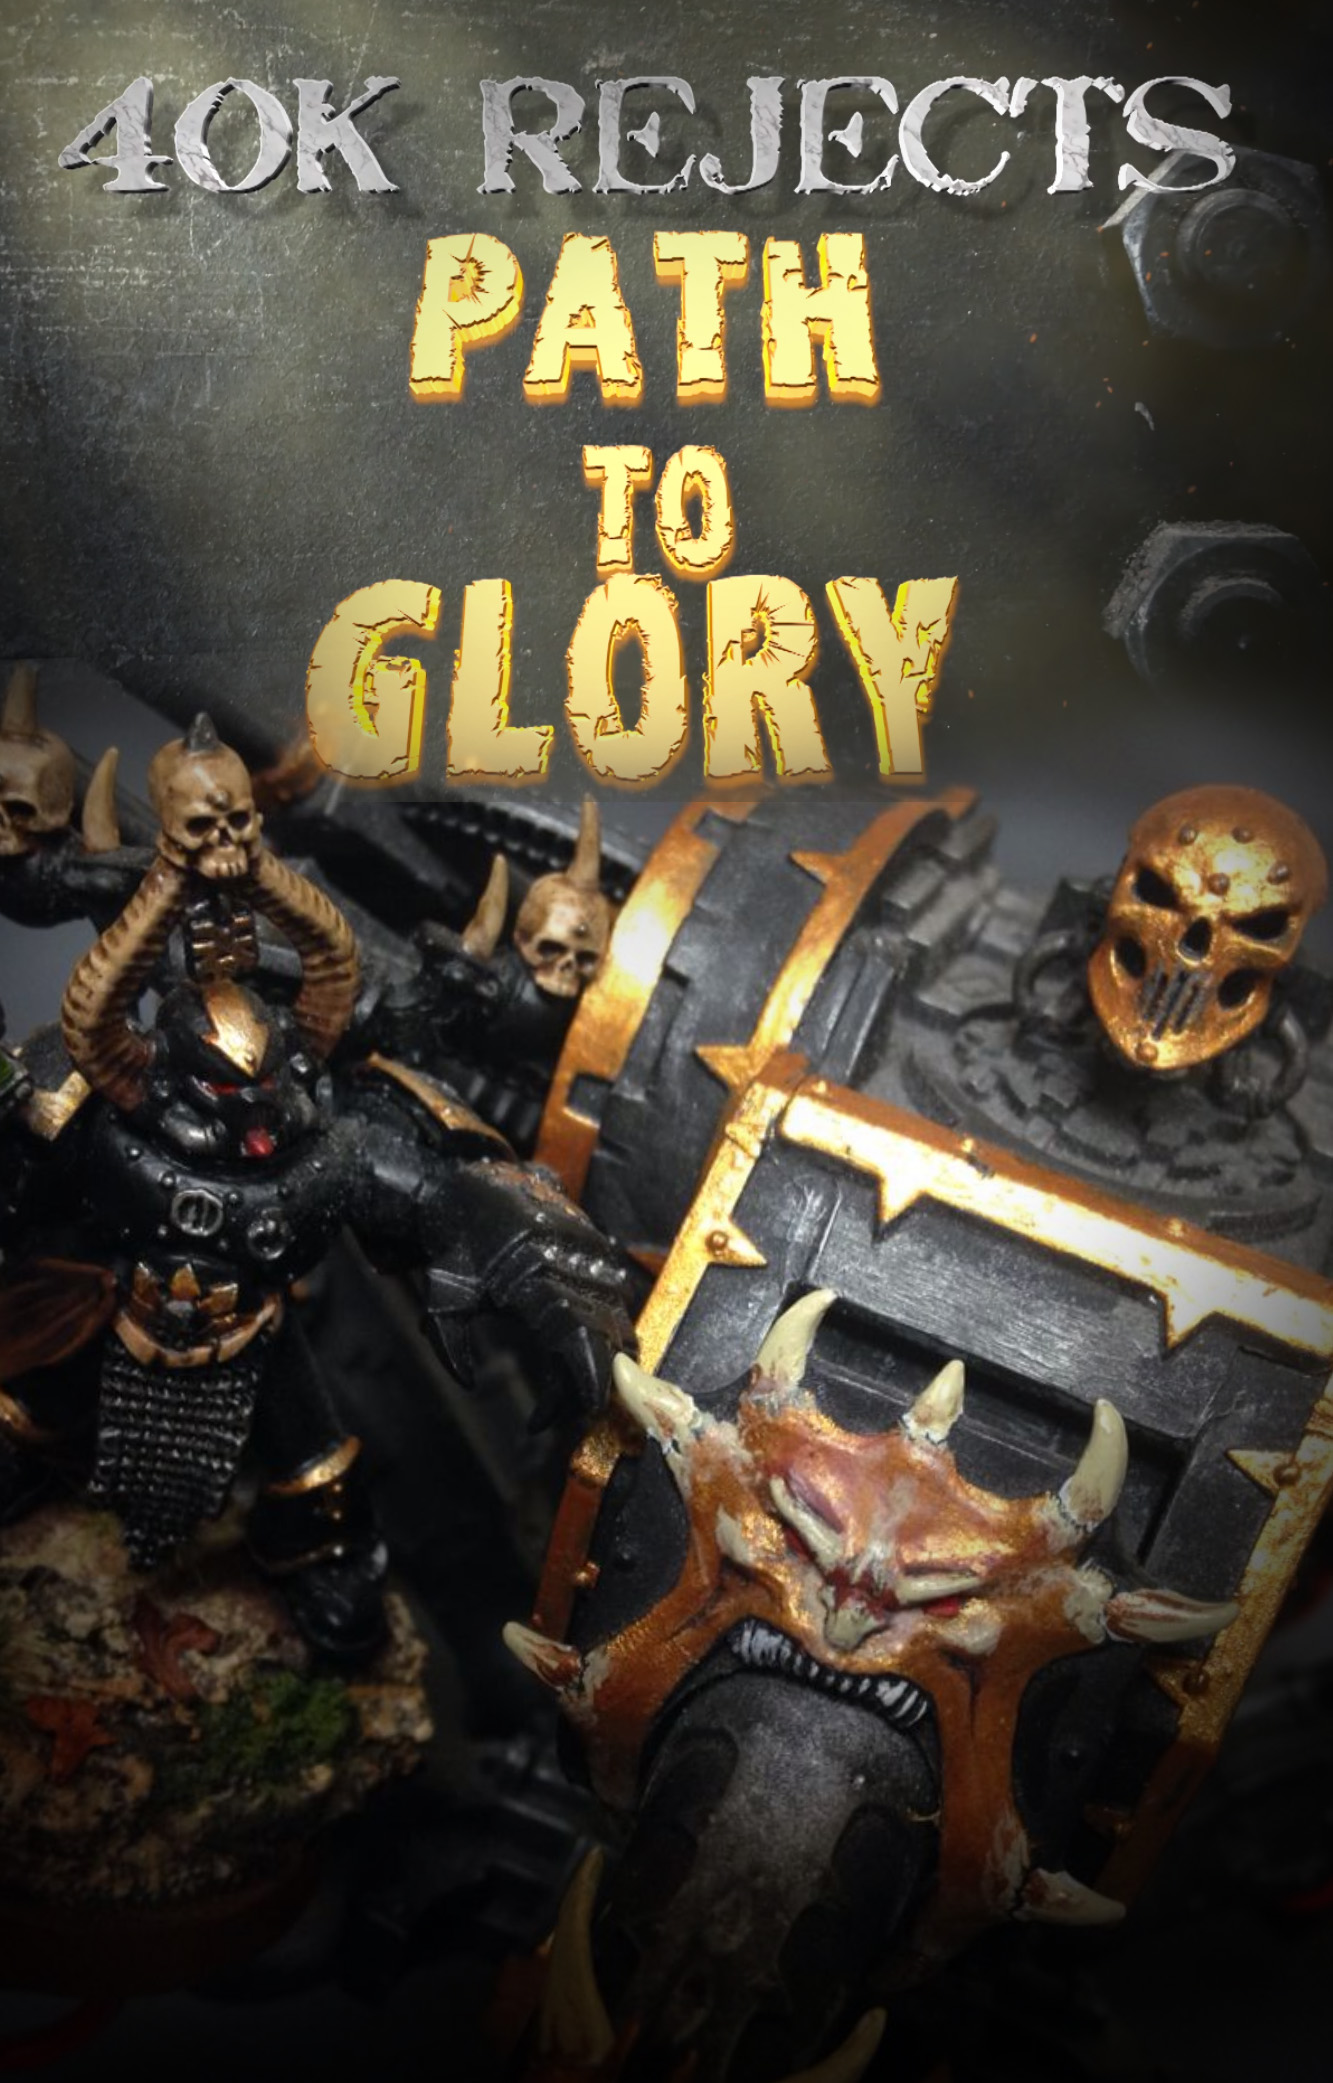 40k Rejects Path to Glory - Chaos vs Sons of Horus Campaign